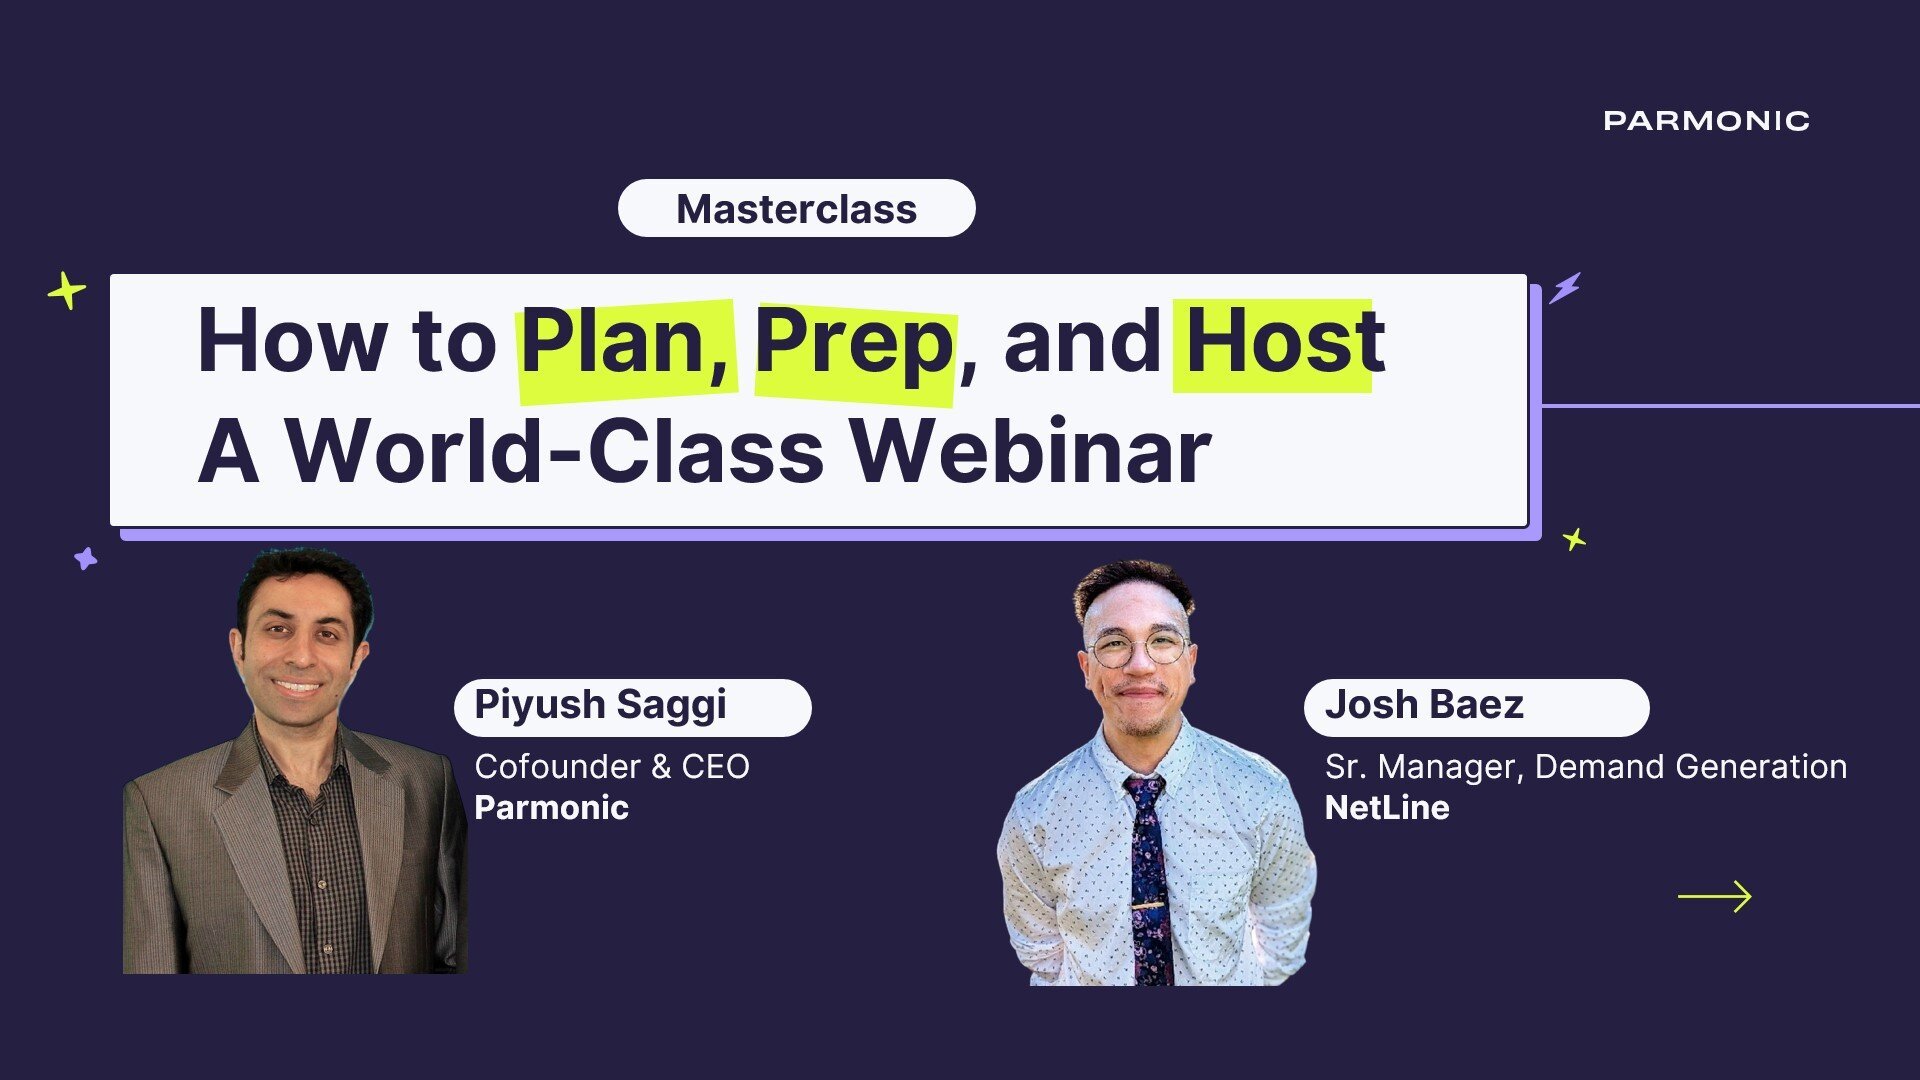 How to Plan, Prep and Host a World-Class Webinar